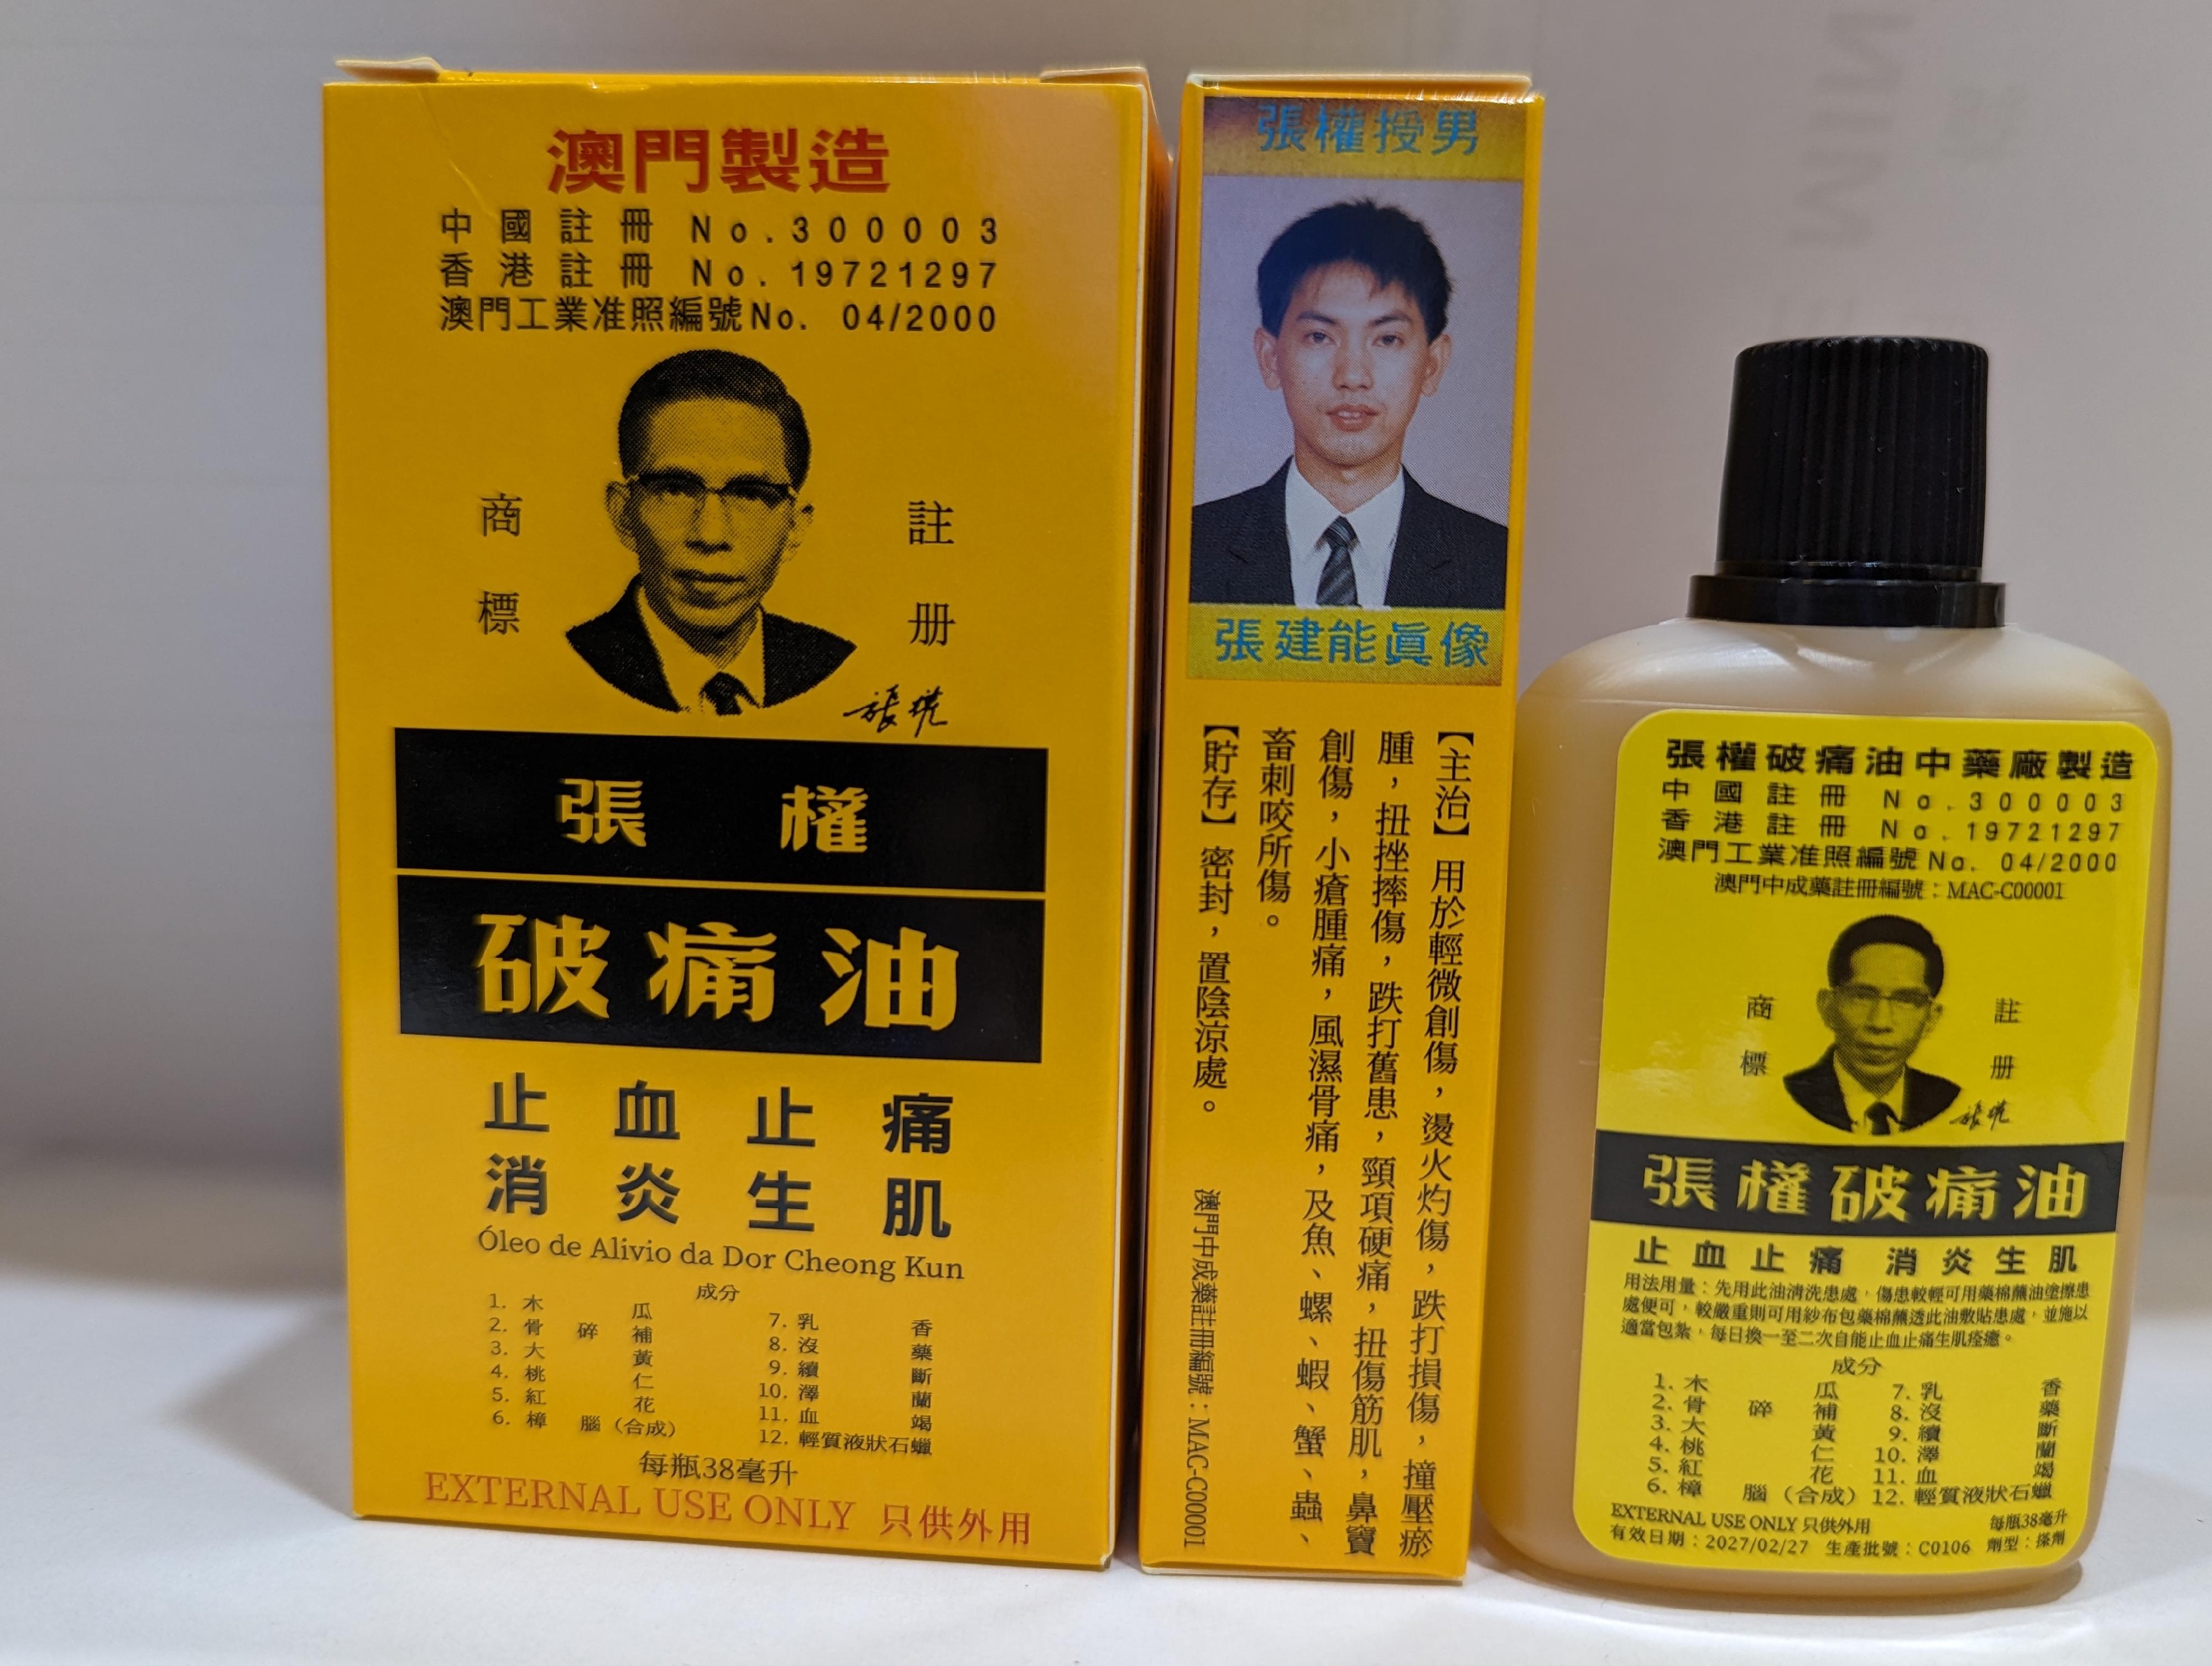 The Department of Health took action on September 6 to investigate Yan Hong Dispensary Limited at Upper Ground Floor, Metro City Phase II in Tseung Kwan O for suspected illegal possession of an unregistered proprietary Chinese medicine. Photo shows the unregistered proprietary Chinese medicine.